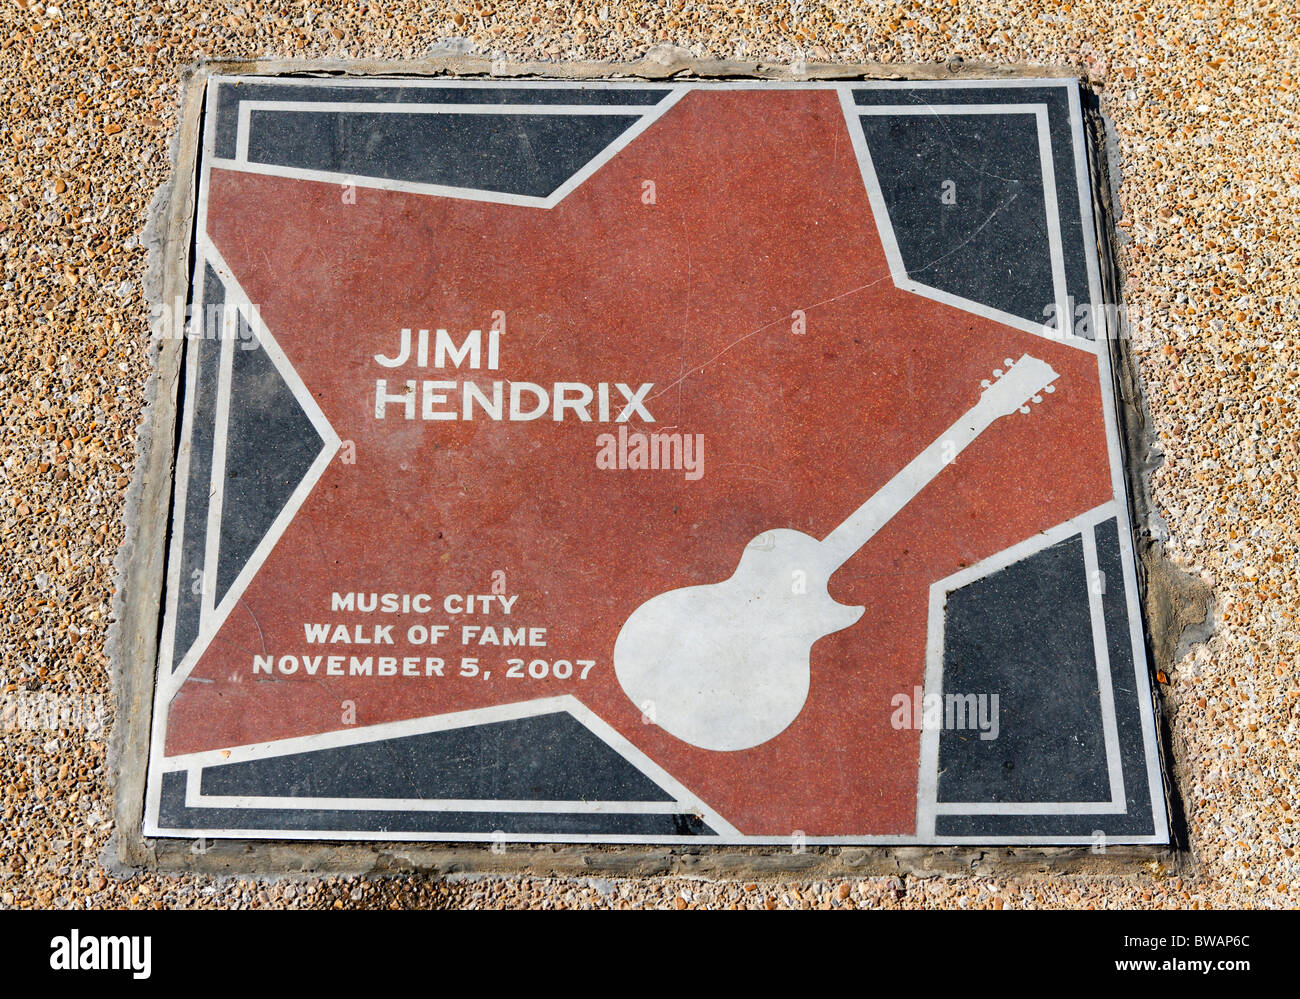 Jimi Hendrix star in the Music City Walk of Fame Park, Nashville, Tennessee, USA Stock Photo